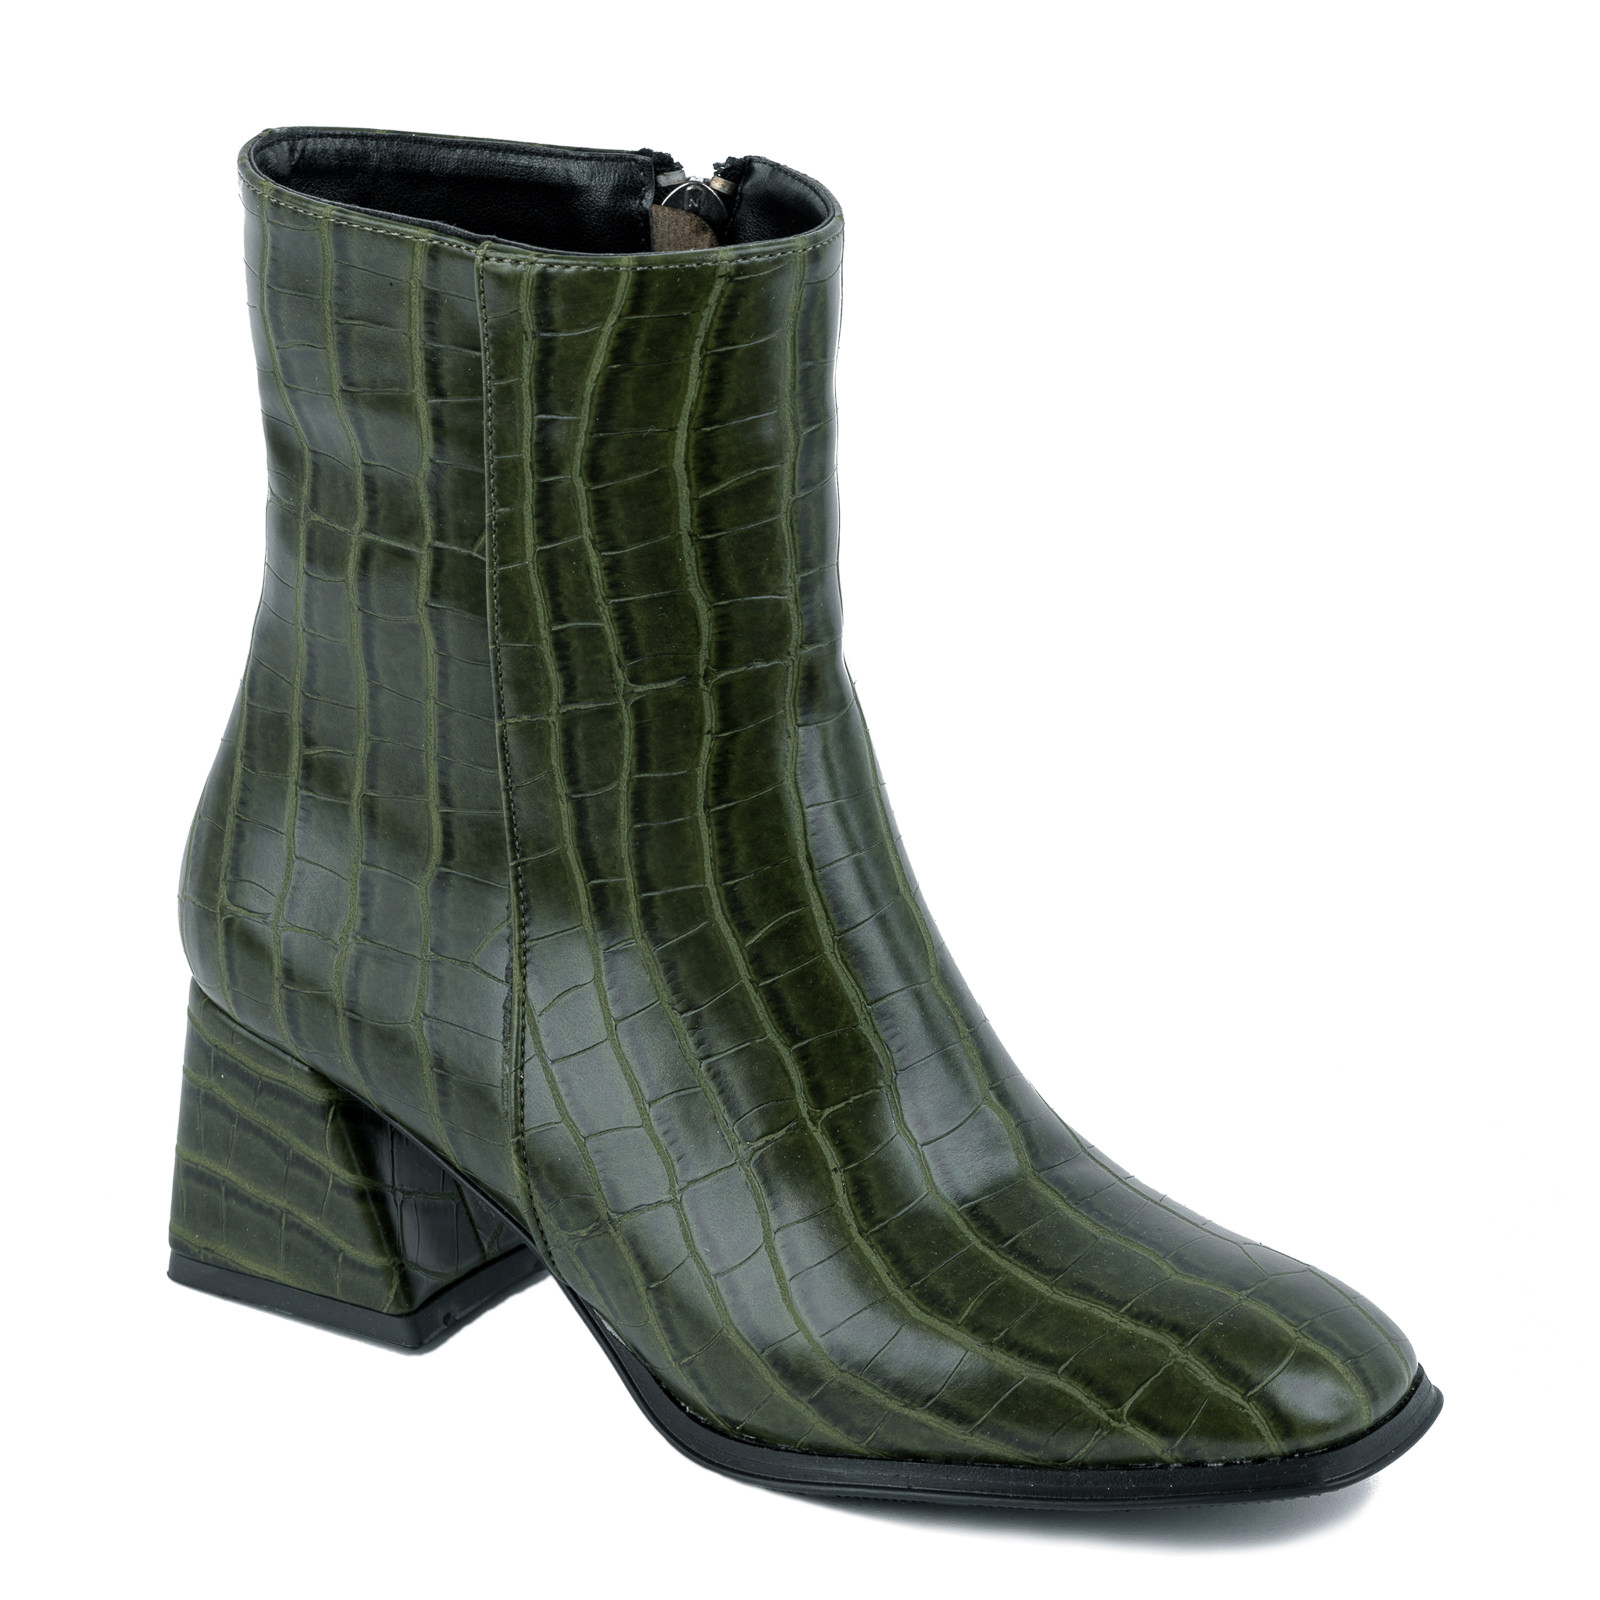 CROC ANKLE BOOTS WITH BLOCK HEEL - GREEN